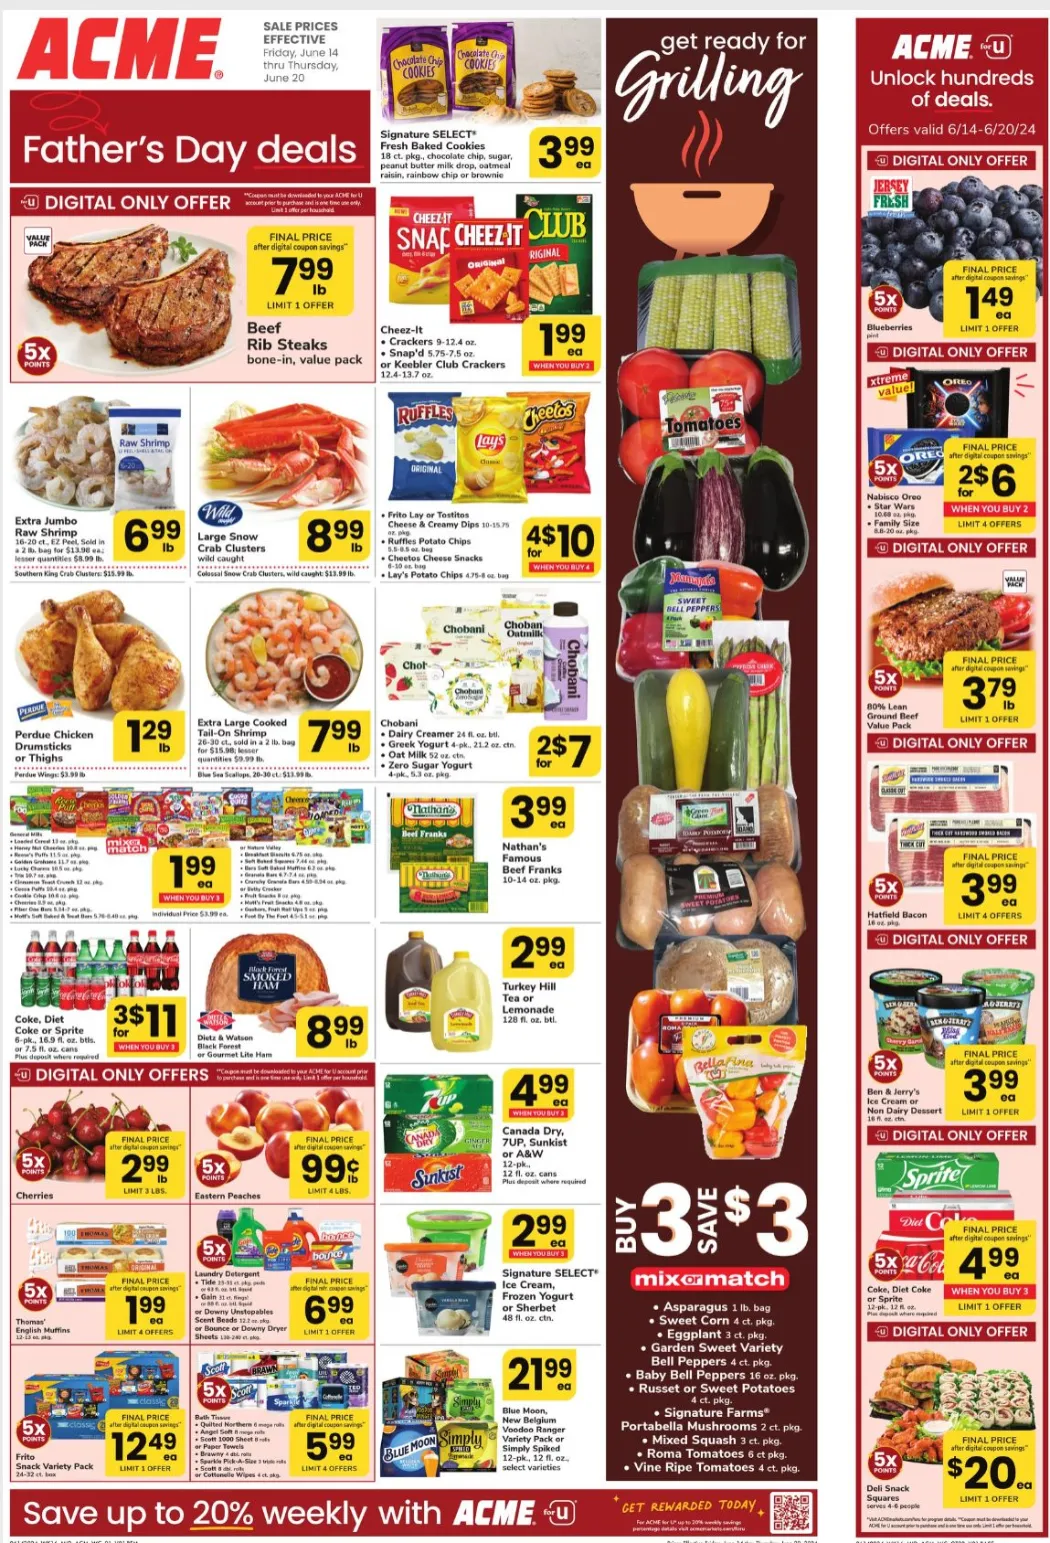 Acme Weekly Ad July 2024 Weekly Sales, Deals, Discounts and Digital Coupons.